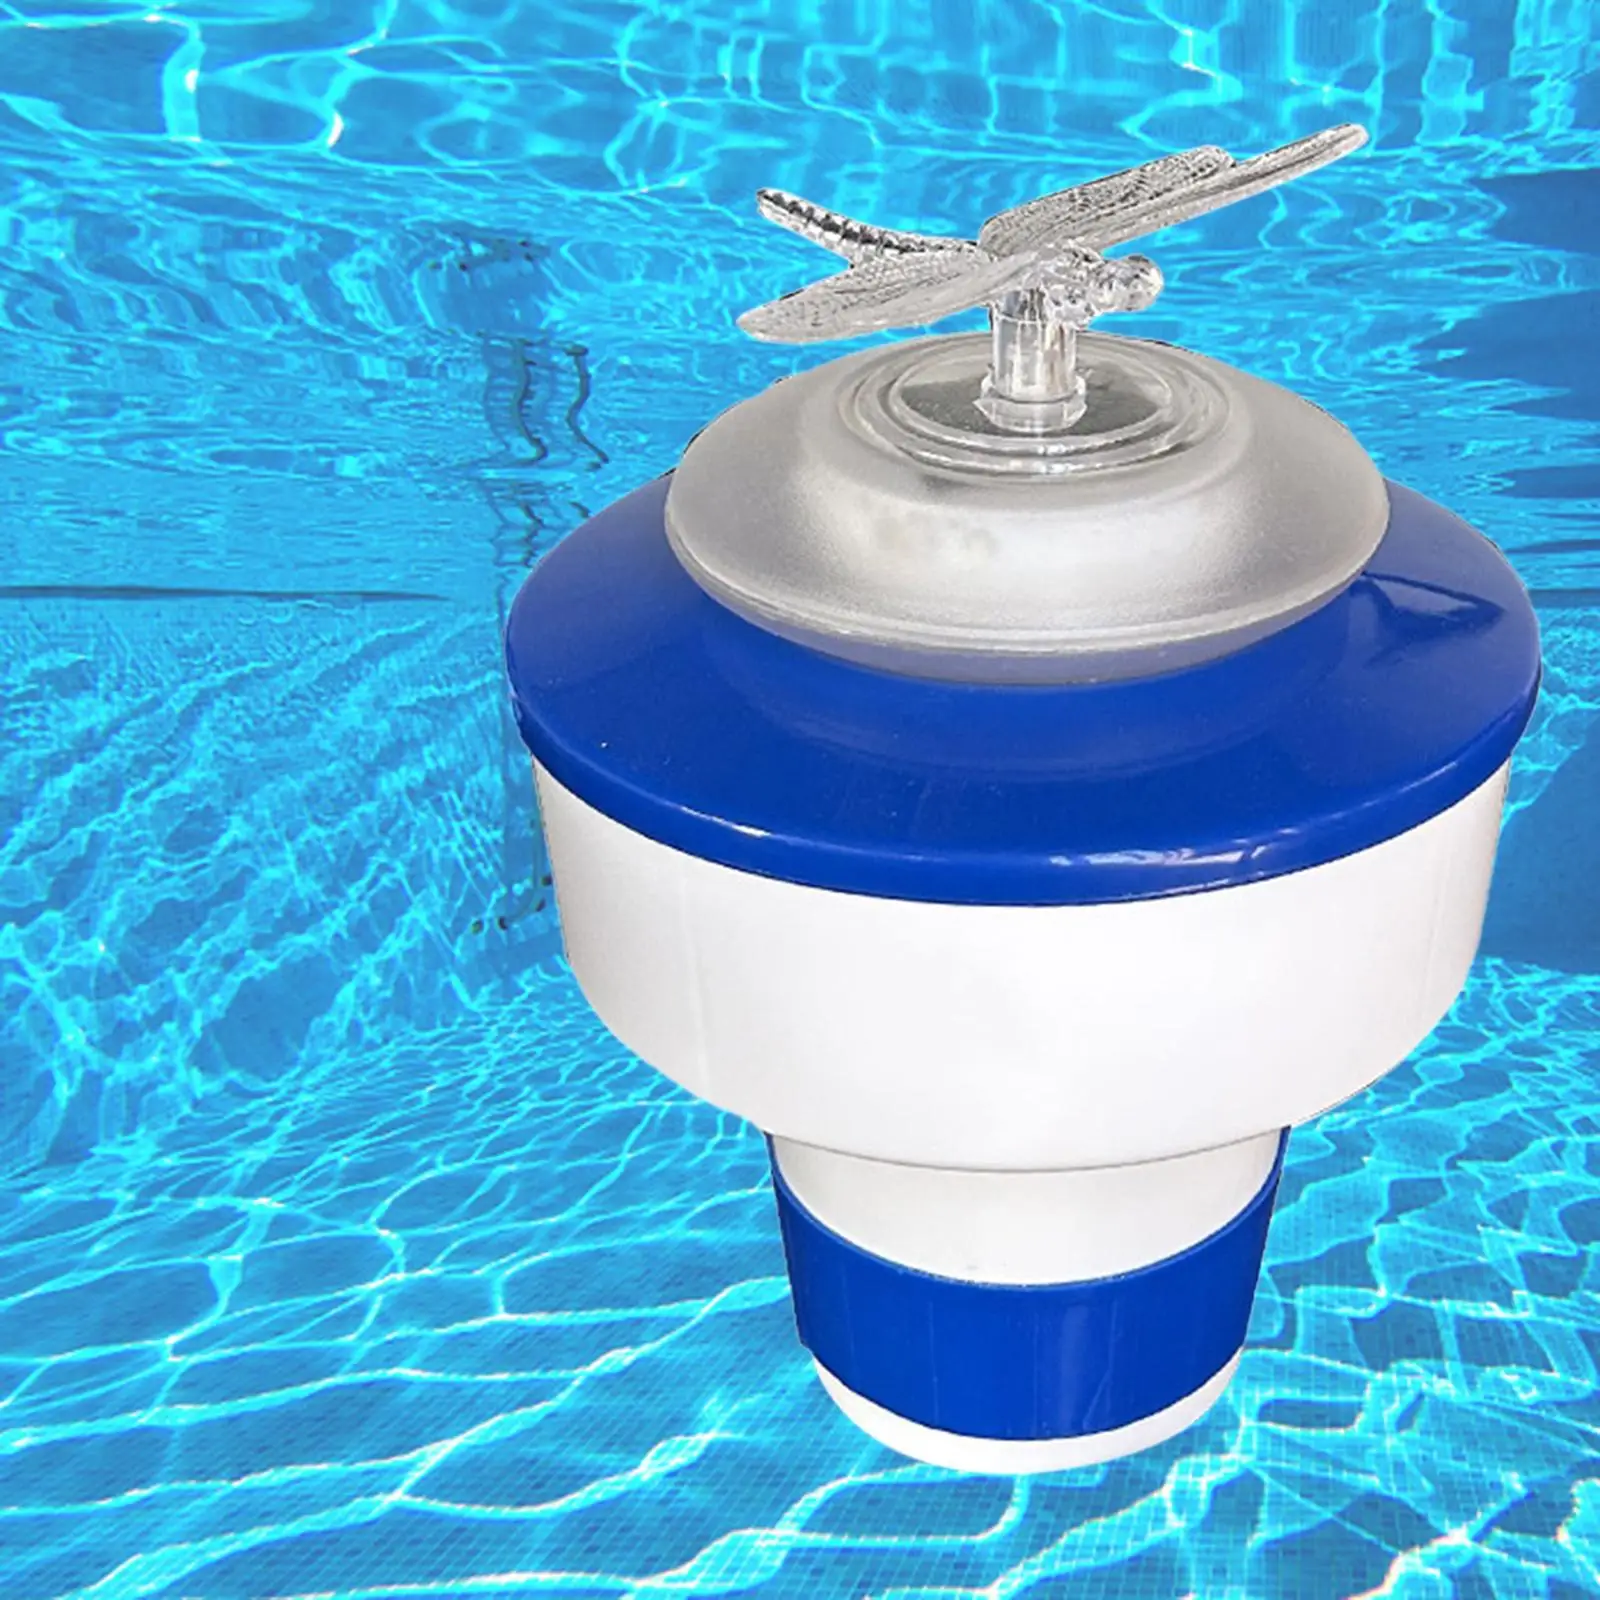 Pool Chlorine Floater Solar Fits 1 and 3 inch Tablets Floating Chlorine Dispenser for Pool for Hot Tubs Indoor Outdoor Accessory